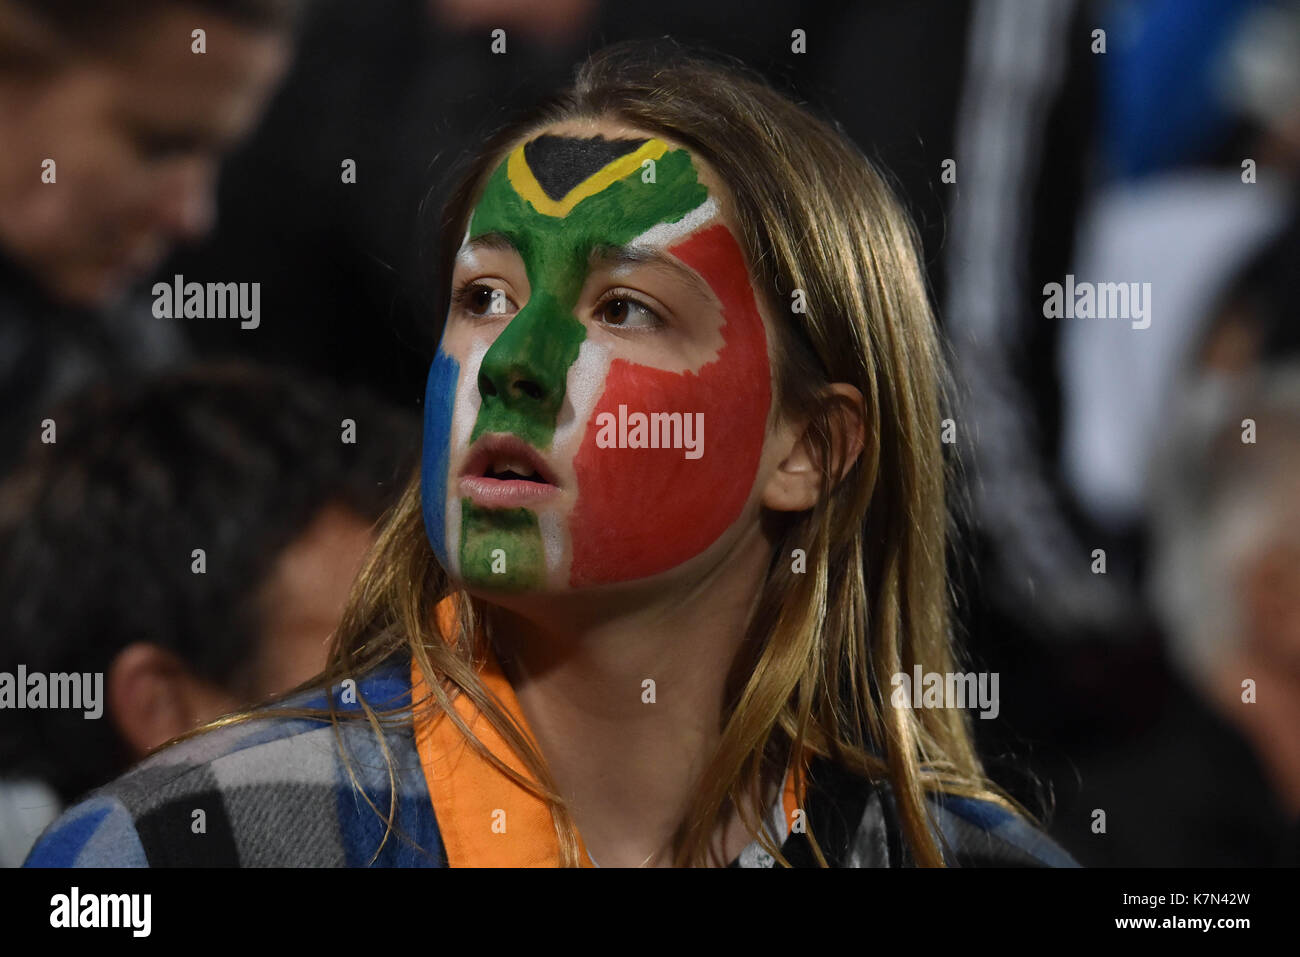 Auckland, New Zealand. 16th Sep, 2017. South Africa fans during the Rugby Championship test match between the New Zealand All Blacks and the South Africa Springboks at QBE stadium in Auckland on Sep 16, 2017. All Blacks beats Springboks 57-0. Credit: Shirley Kwok/Pacific Press/Alamy Live News Stock Photo